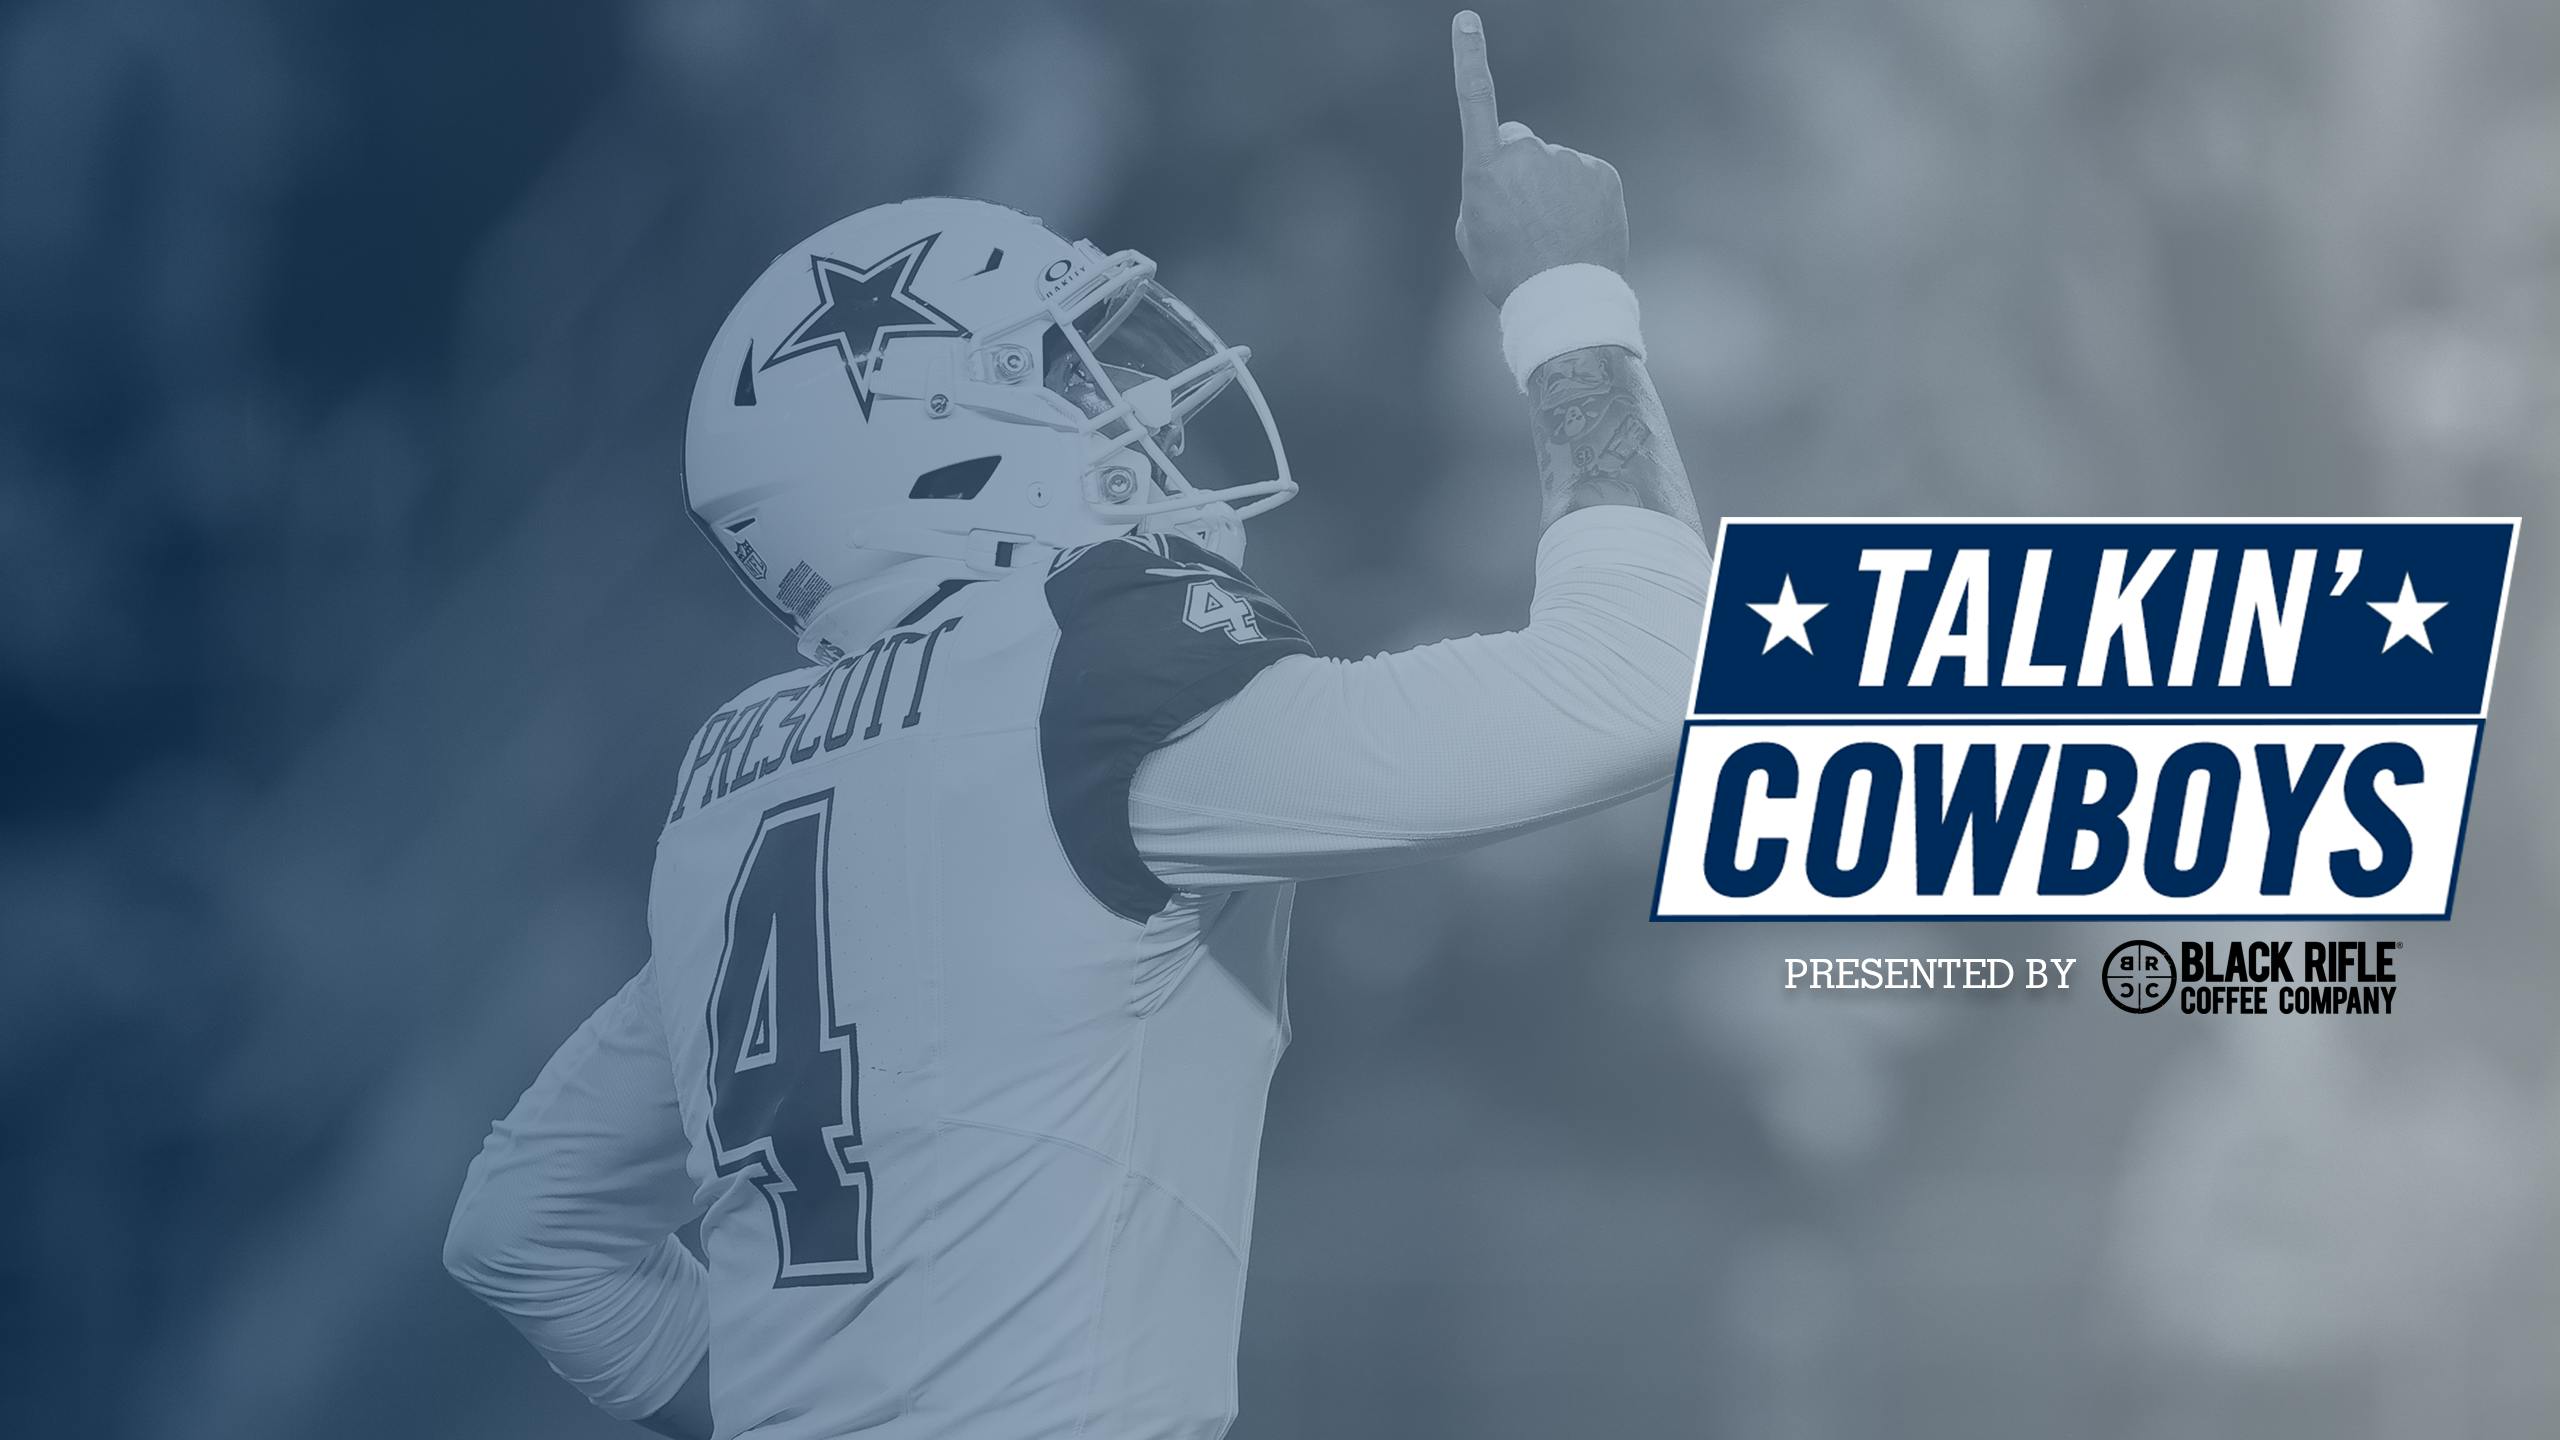 Talkin’ Cowboys: All In the Family